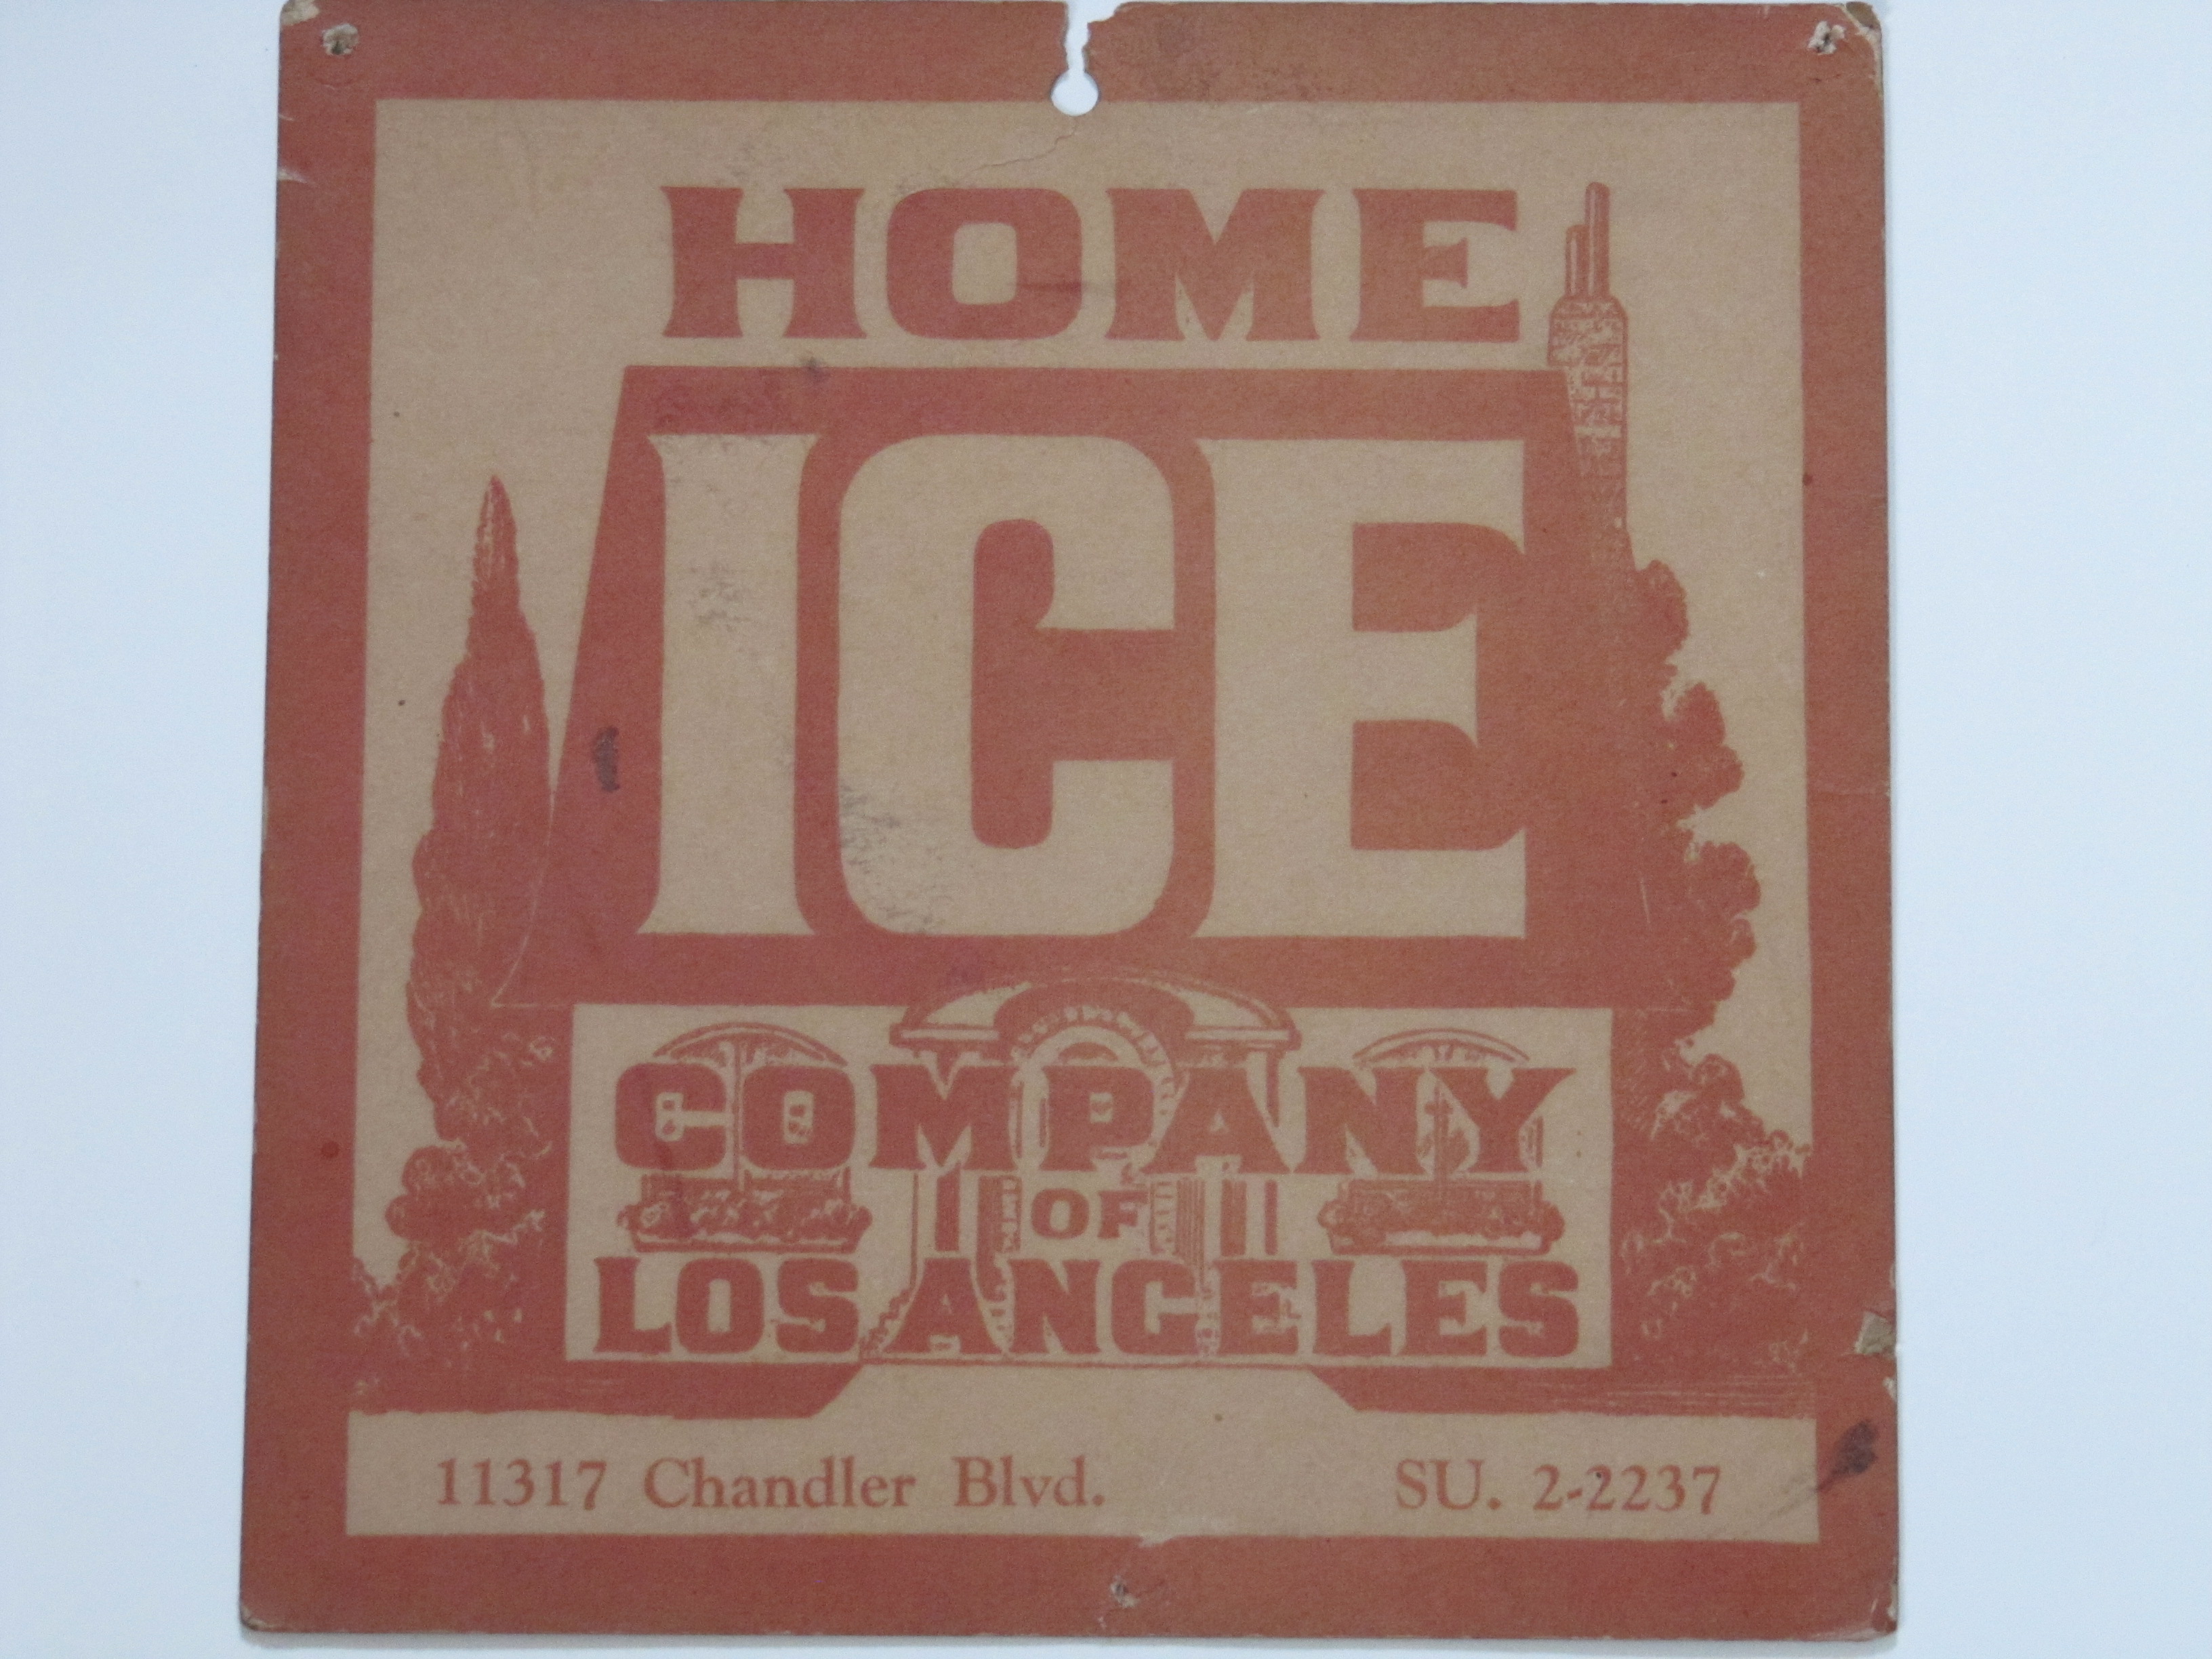 Home Ice Co of L.A.